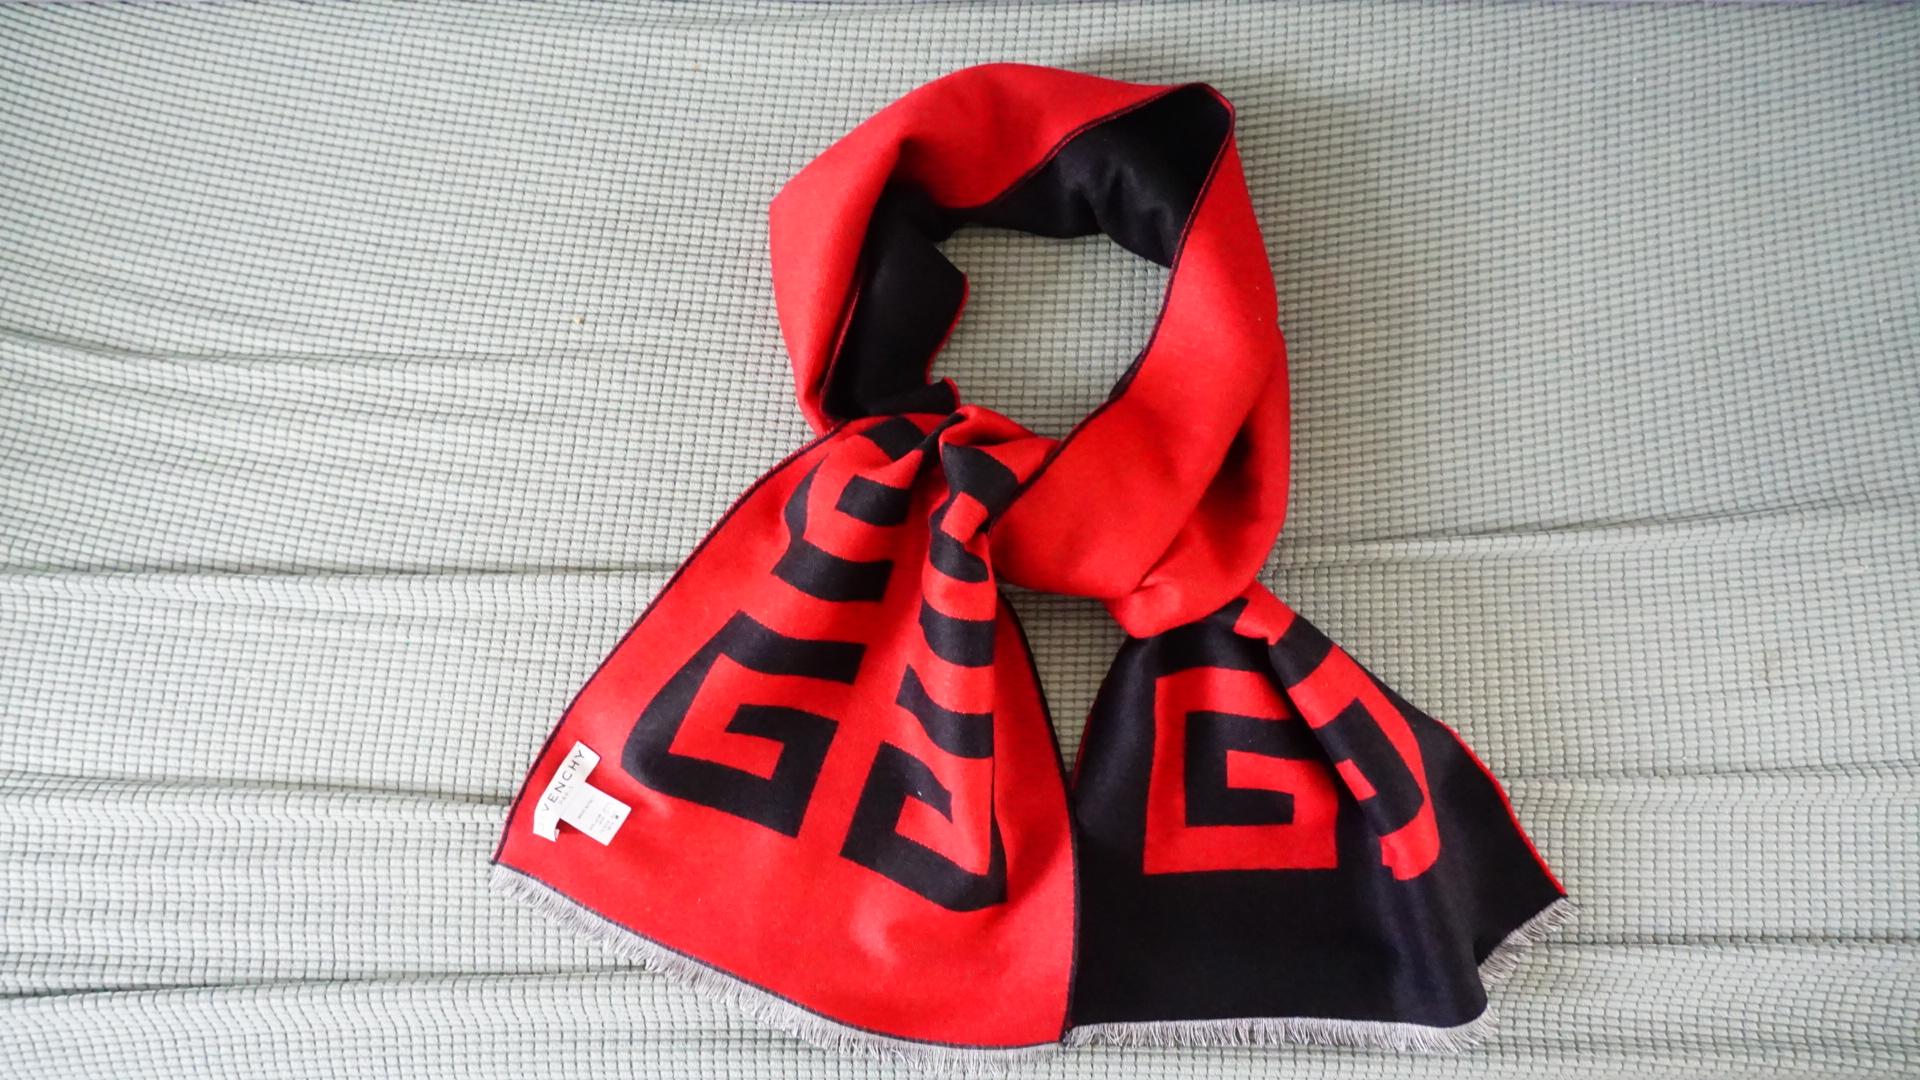 100% GENUINE.

Black and Red

40*190cm

Lightweight

Block swirl pattern

93% Wool, 7% Silk

Dry Clean

_ _ _

Great for everyday wear. Come with velvet pouch and beautiful package.

Makes the perfect gift for Teens, Sisters, Friends, Girlfriends,